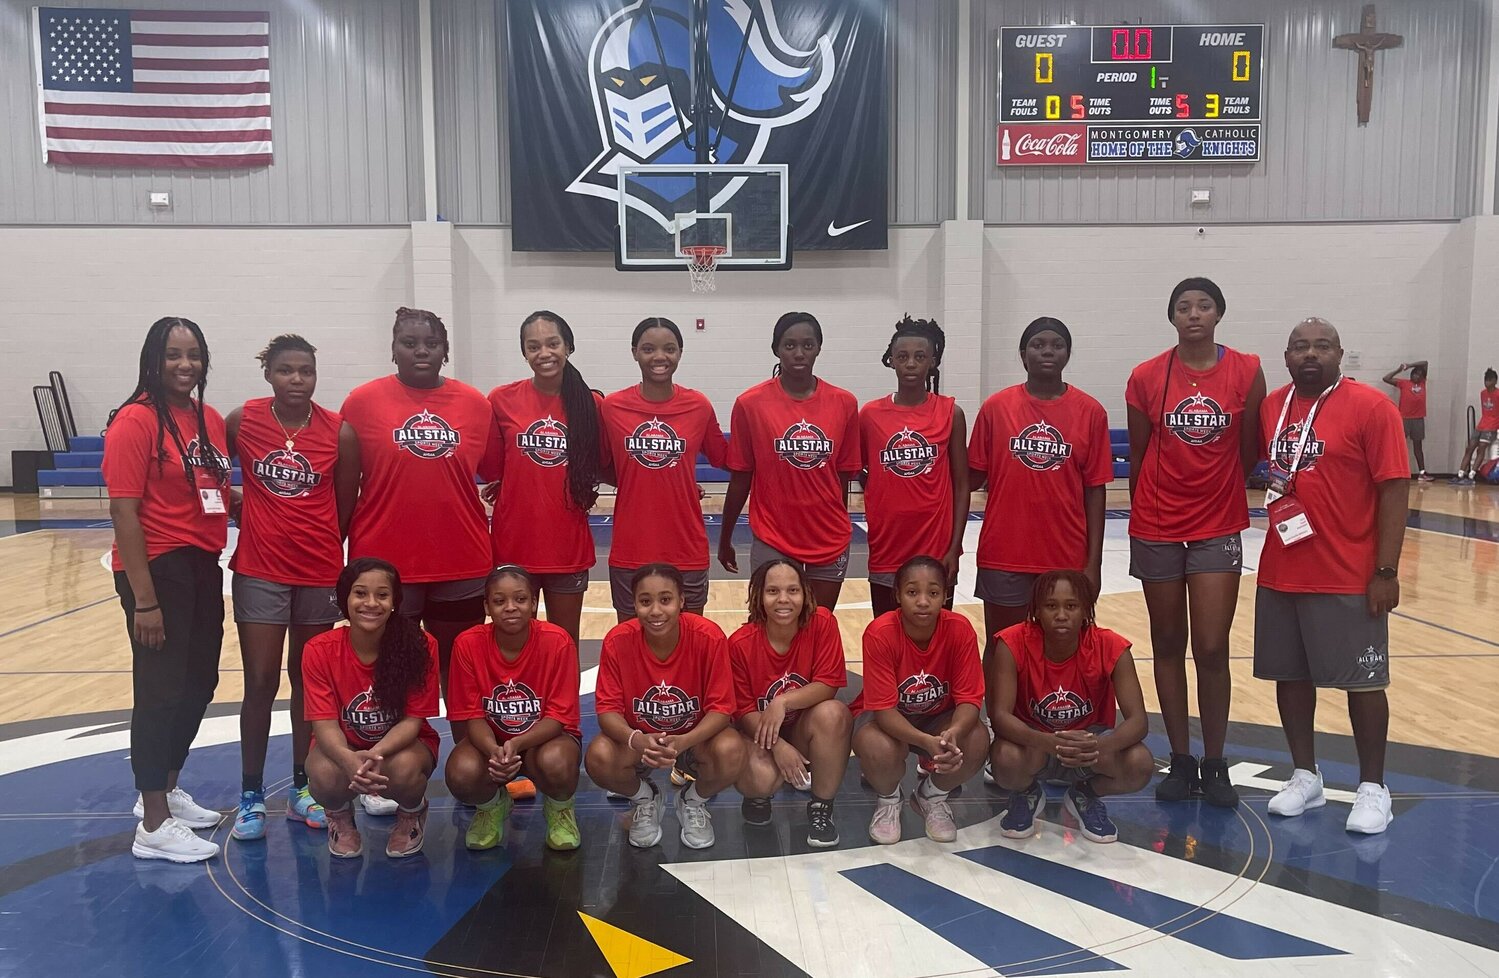 The South All-Star girls’ basketball squad poses for a picture after practice at Montgomery Academy during AHSAA North-South All-Star Week. Coached by Foley’s Emily Flanigan (first on the left in back row), the squad included two Baldwin County players in Ashauntee Hobbs (center of front row) from Foley and La’Merrica Johnson (first on the right in front row) from Daphne.